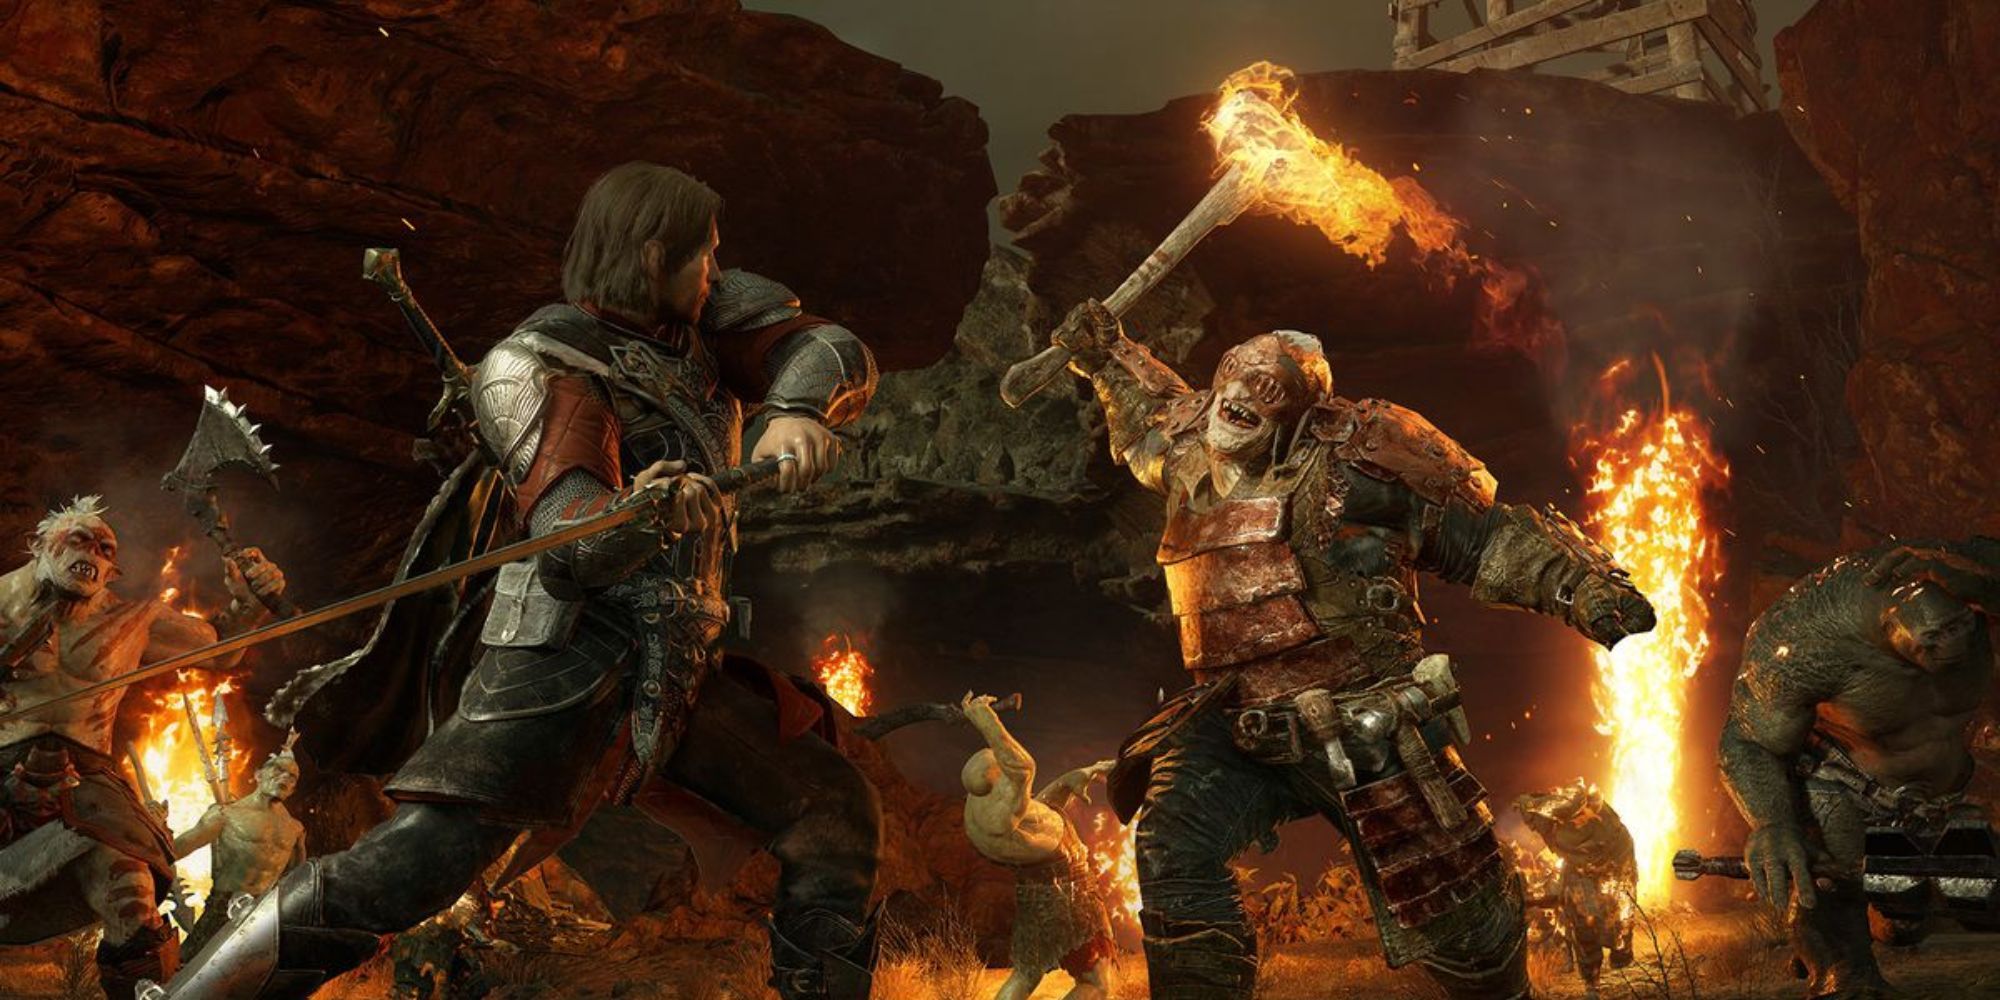 Talion battles an Orc with a flaming weapon while surrounded by other enemies